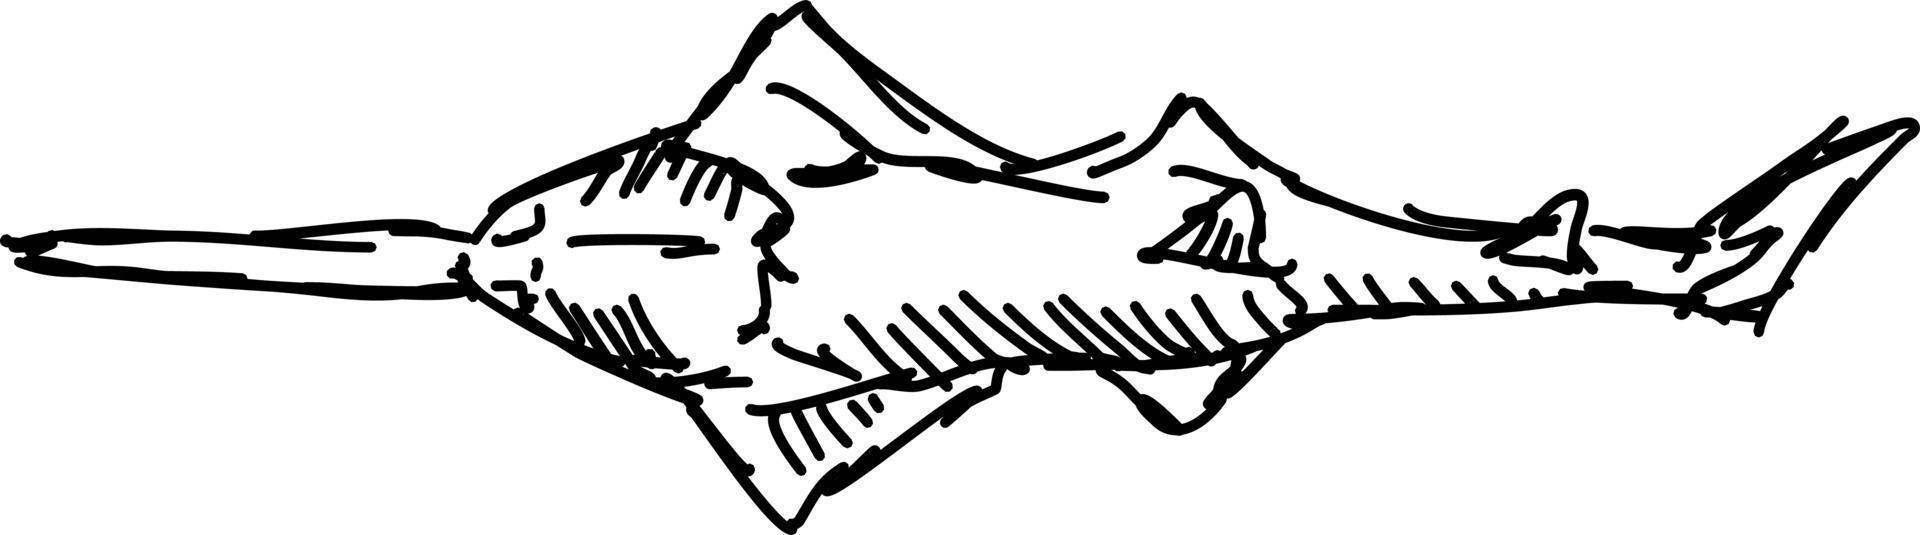 Fish drawing, illustration, vector on white background.